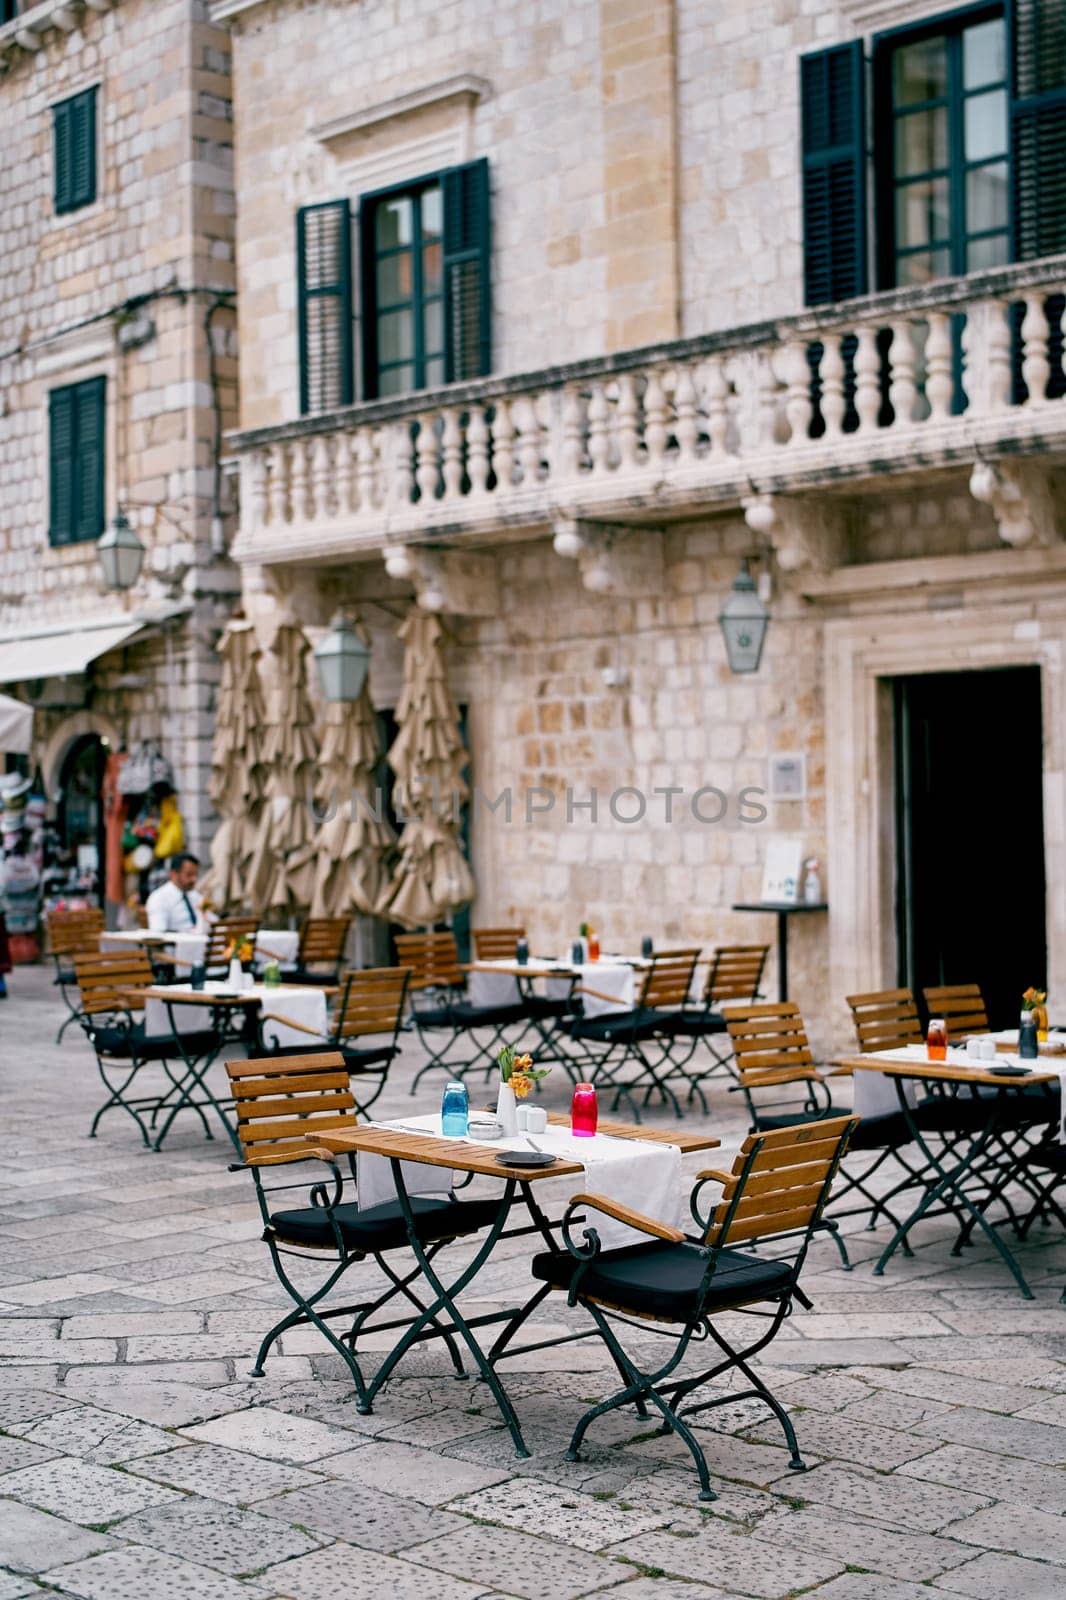 Street cafe near the Pucic Palace hotel. Dubrovnik, Croatia by Nadtochiy